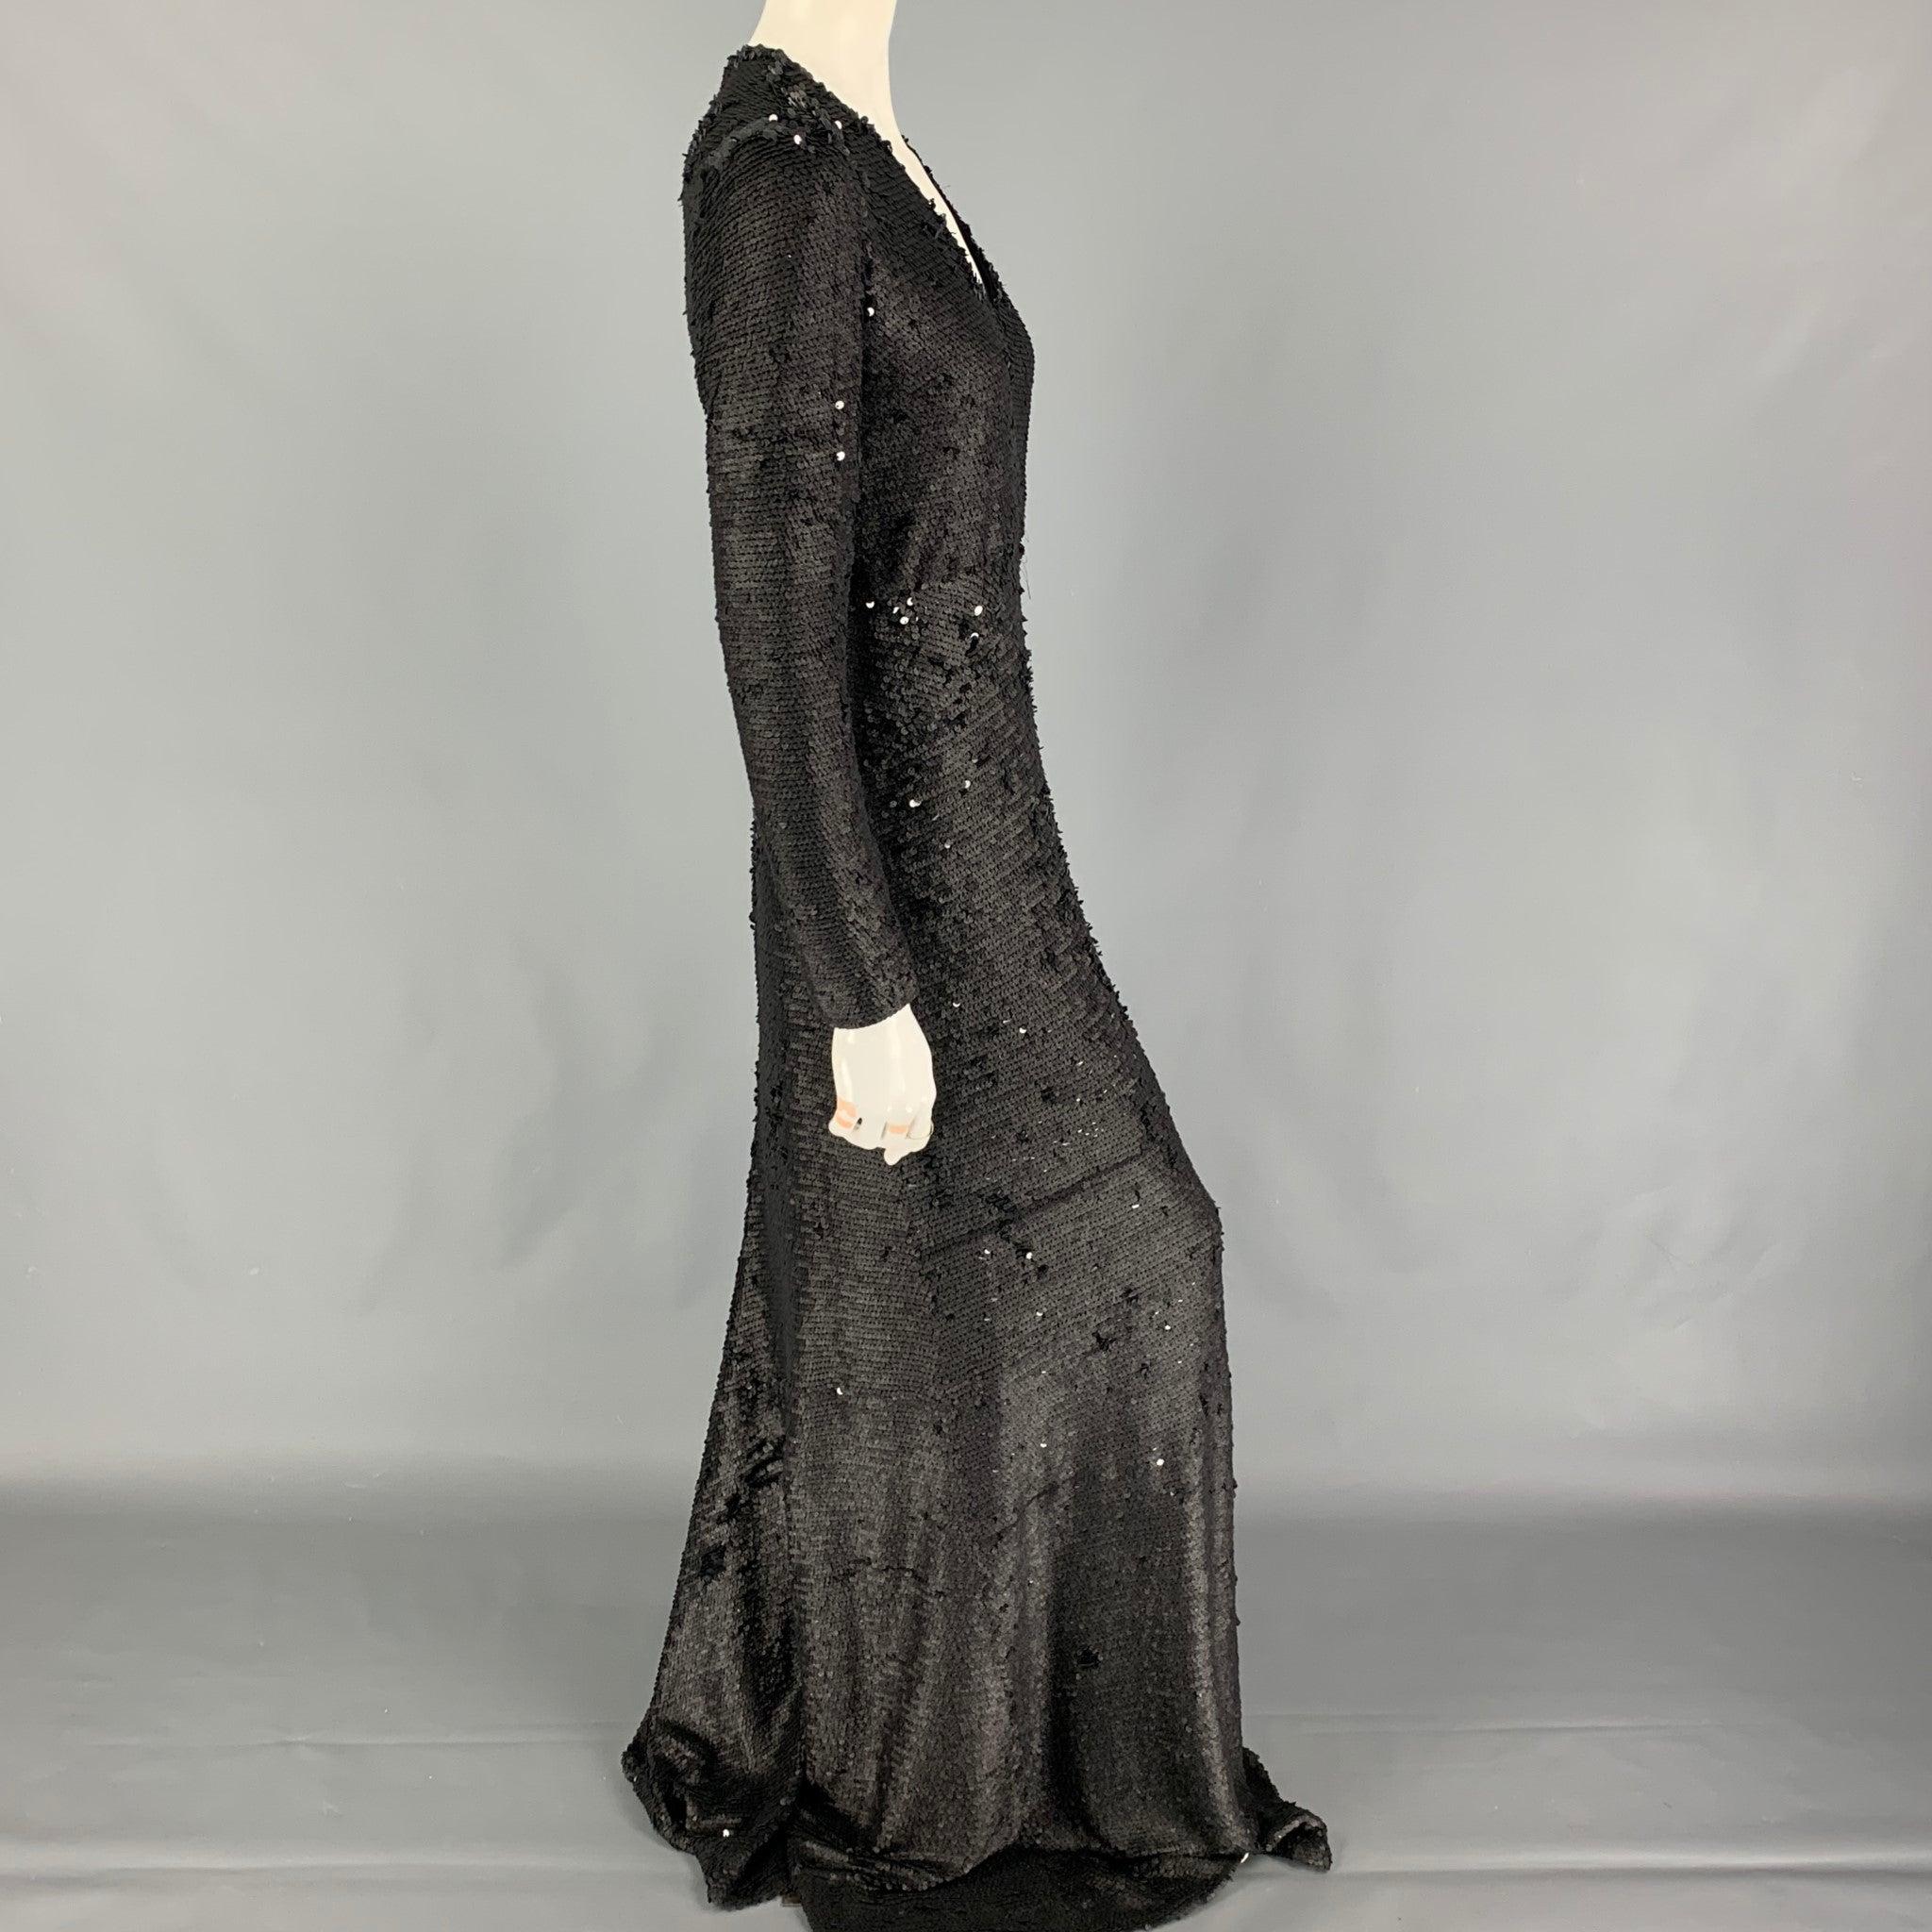 PORTS 1961 dress comes in a black sequined polyester blend featuring long sleeves, v-neck, and a back zip up closure.
Very Good
Pre-Owned Condition. 

Marked:   42 

Measurements: 
 
Shoulder: 13 inches  Bust: 32 inches  Waist: 28 inches  Hip: 30